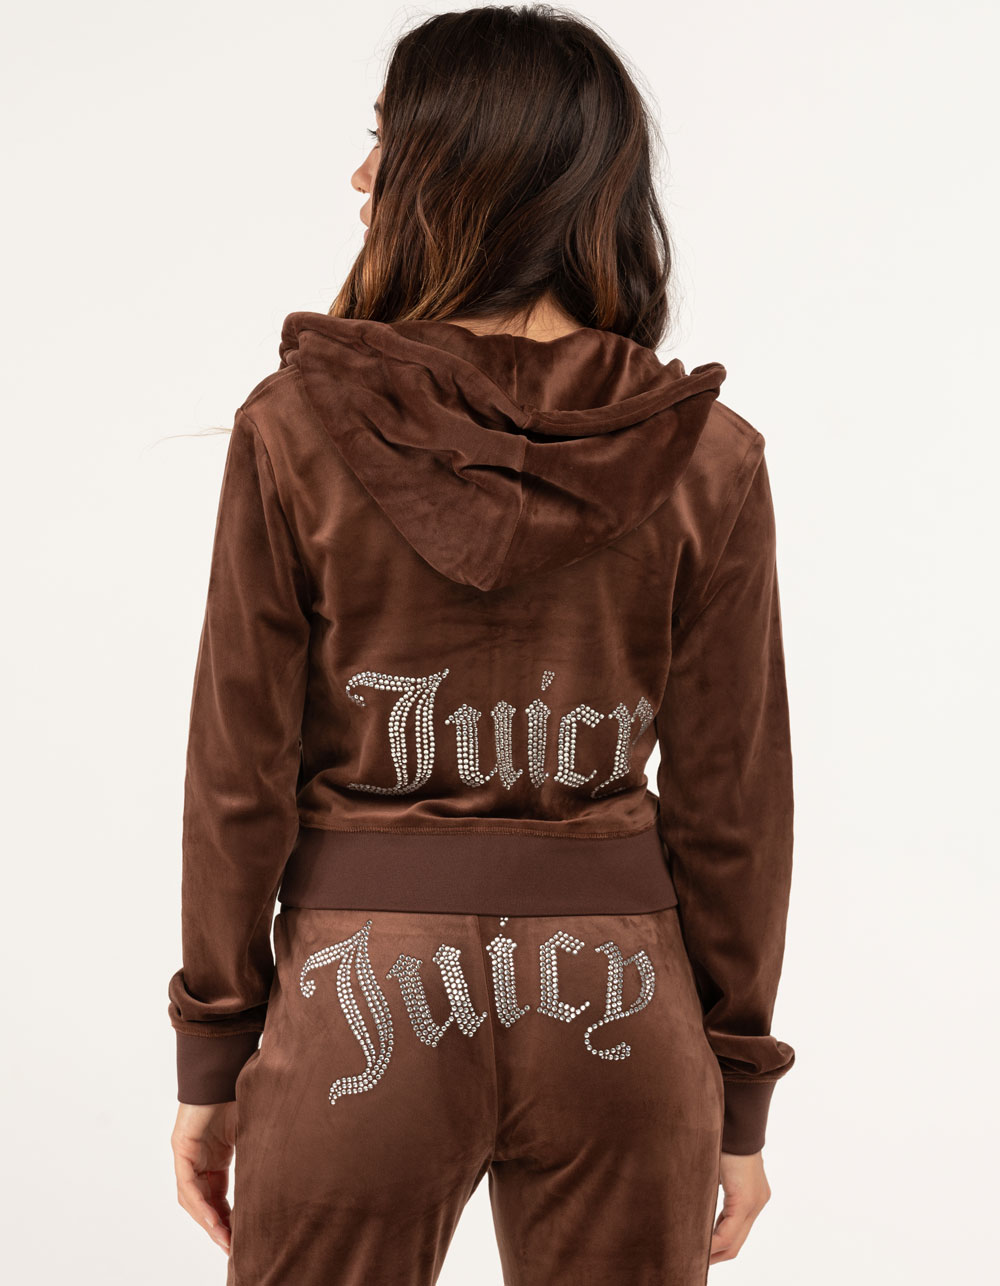 Juicy Couture Apparel | Tillys